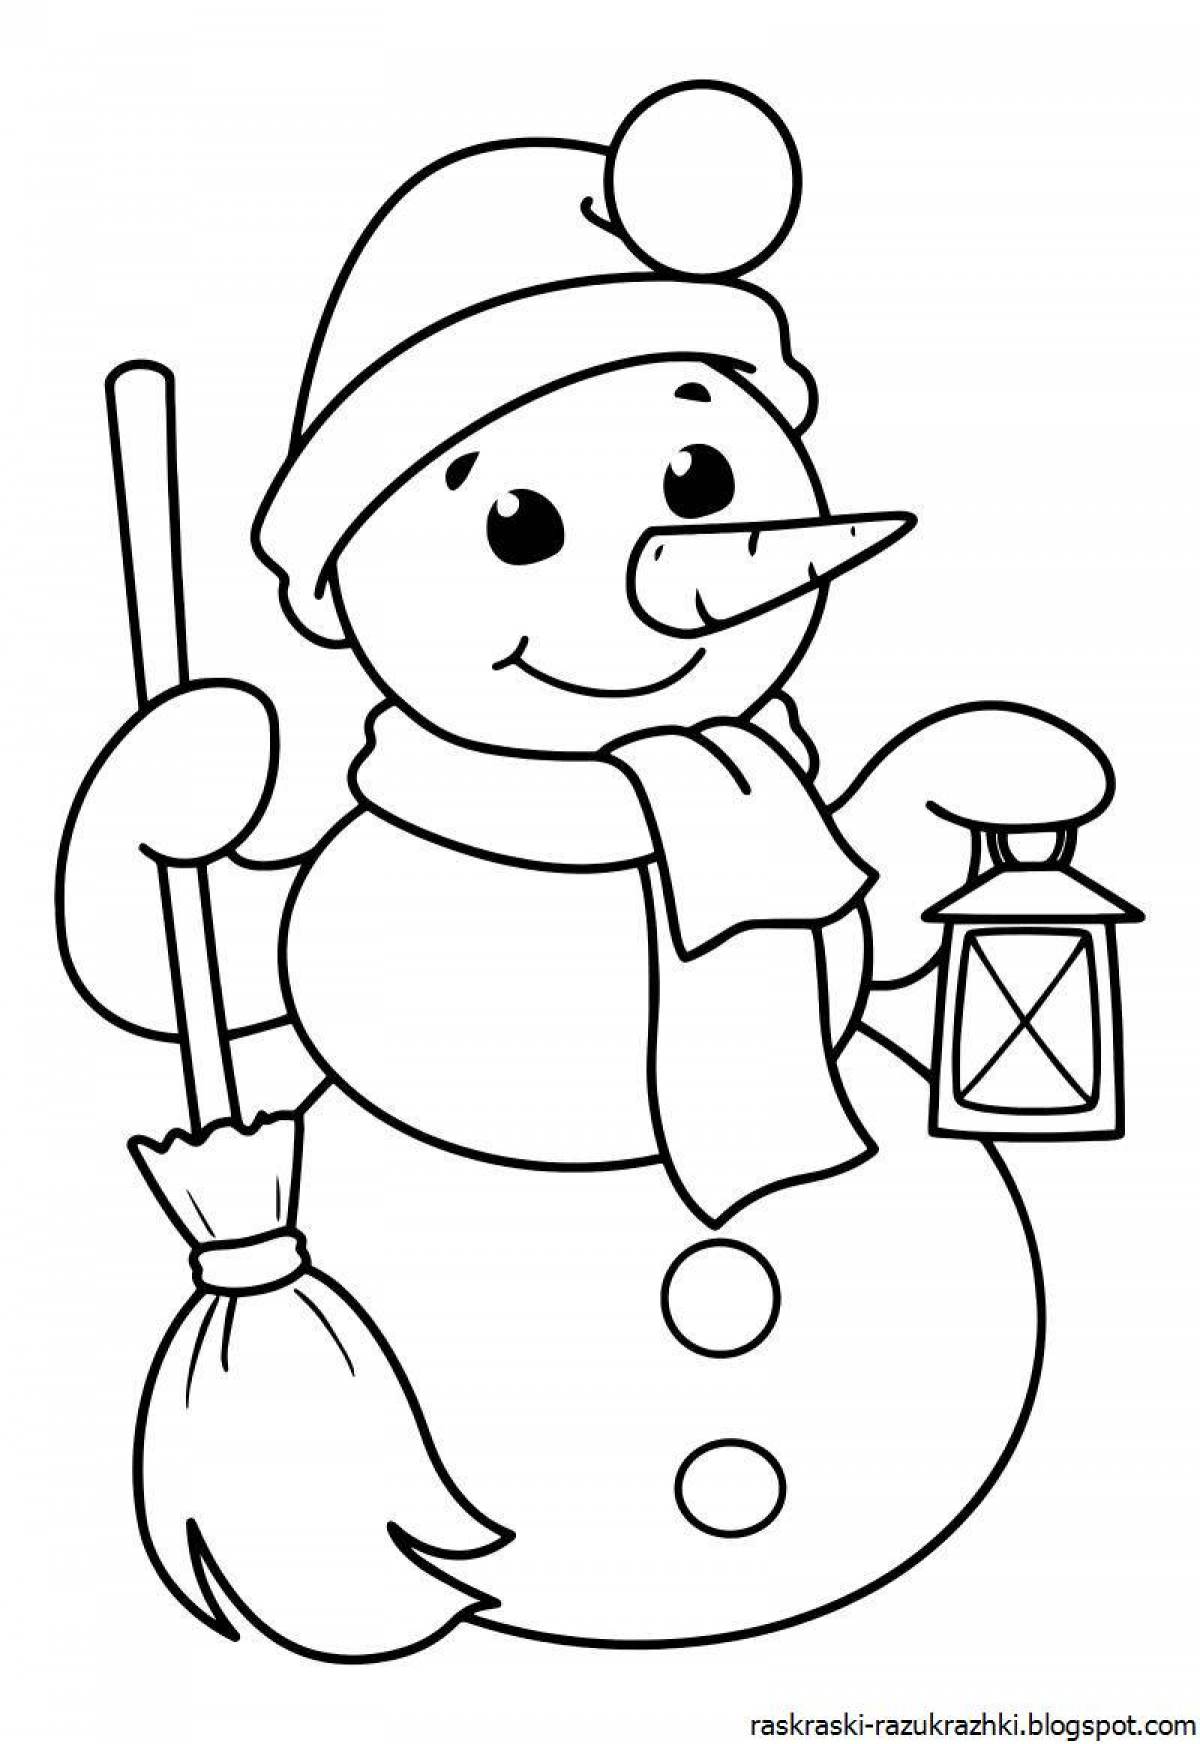 Adorable Christmas Coloring Pages for Kids